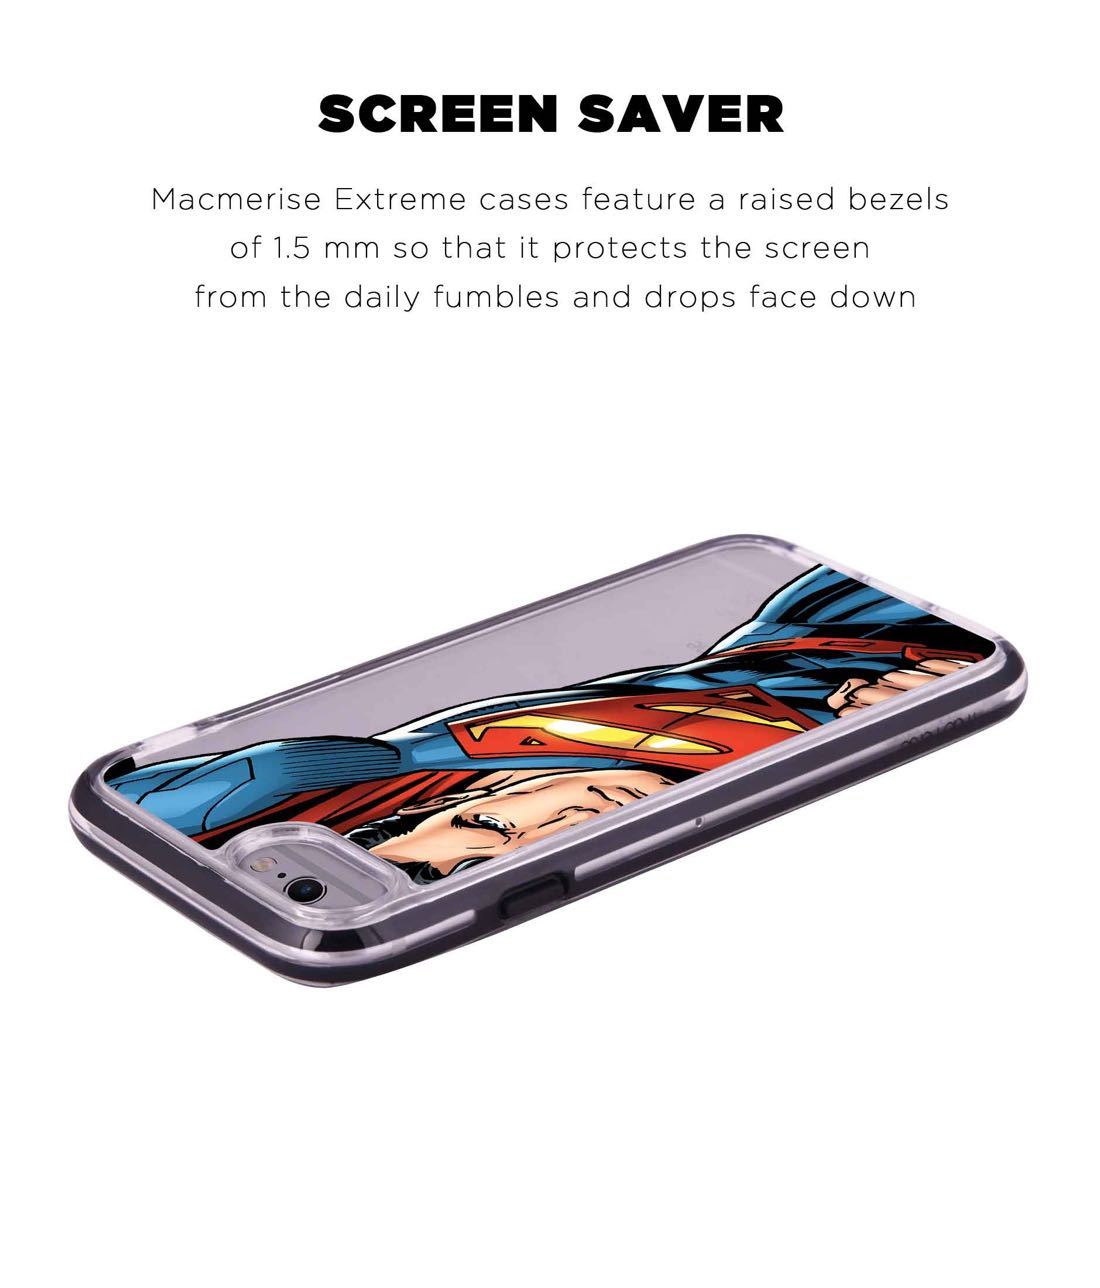 Speed it like Superman - Extreme Phone Case for iPhone 6 Plus